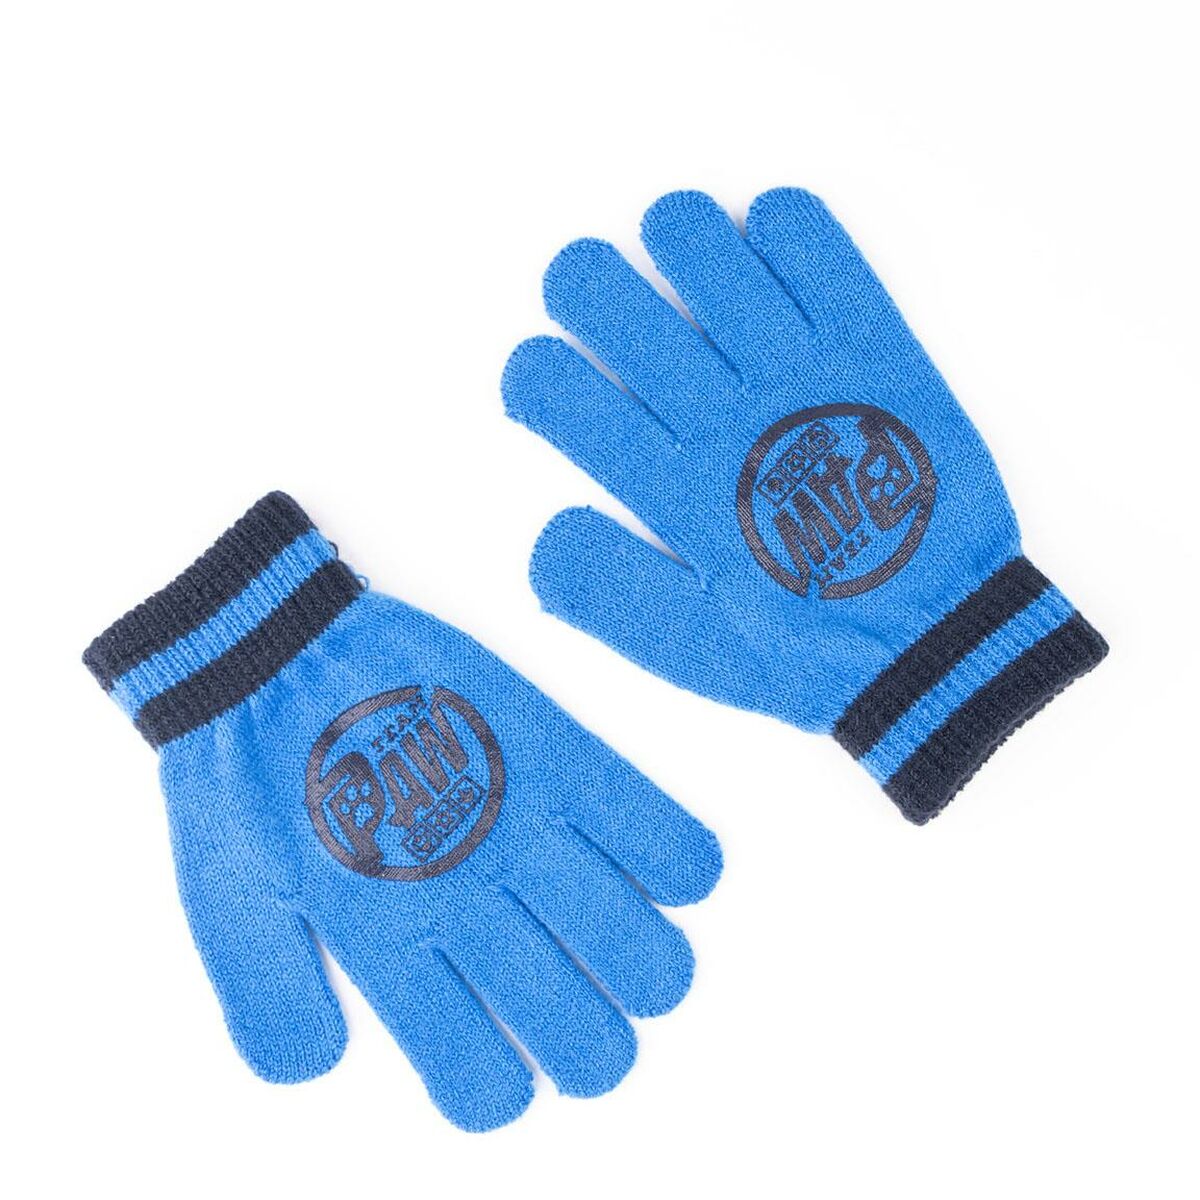 Hat & Gloves The Paw Patrol 2 Pieces Blue